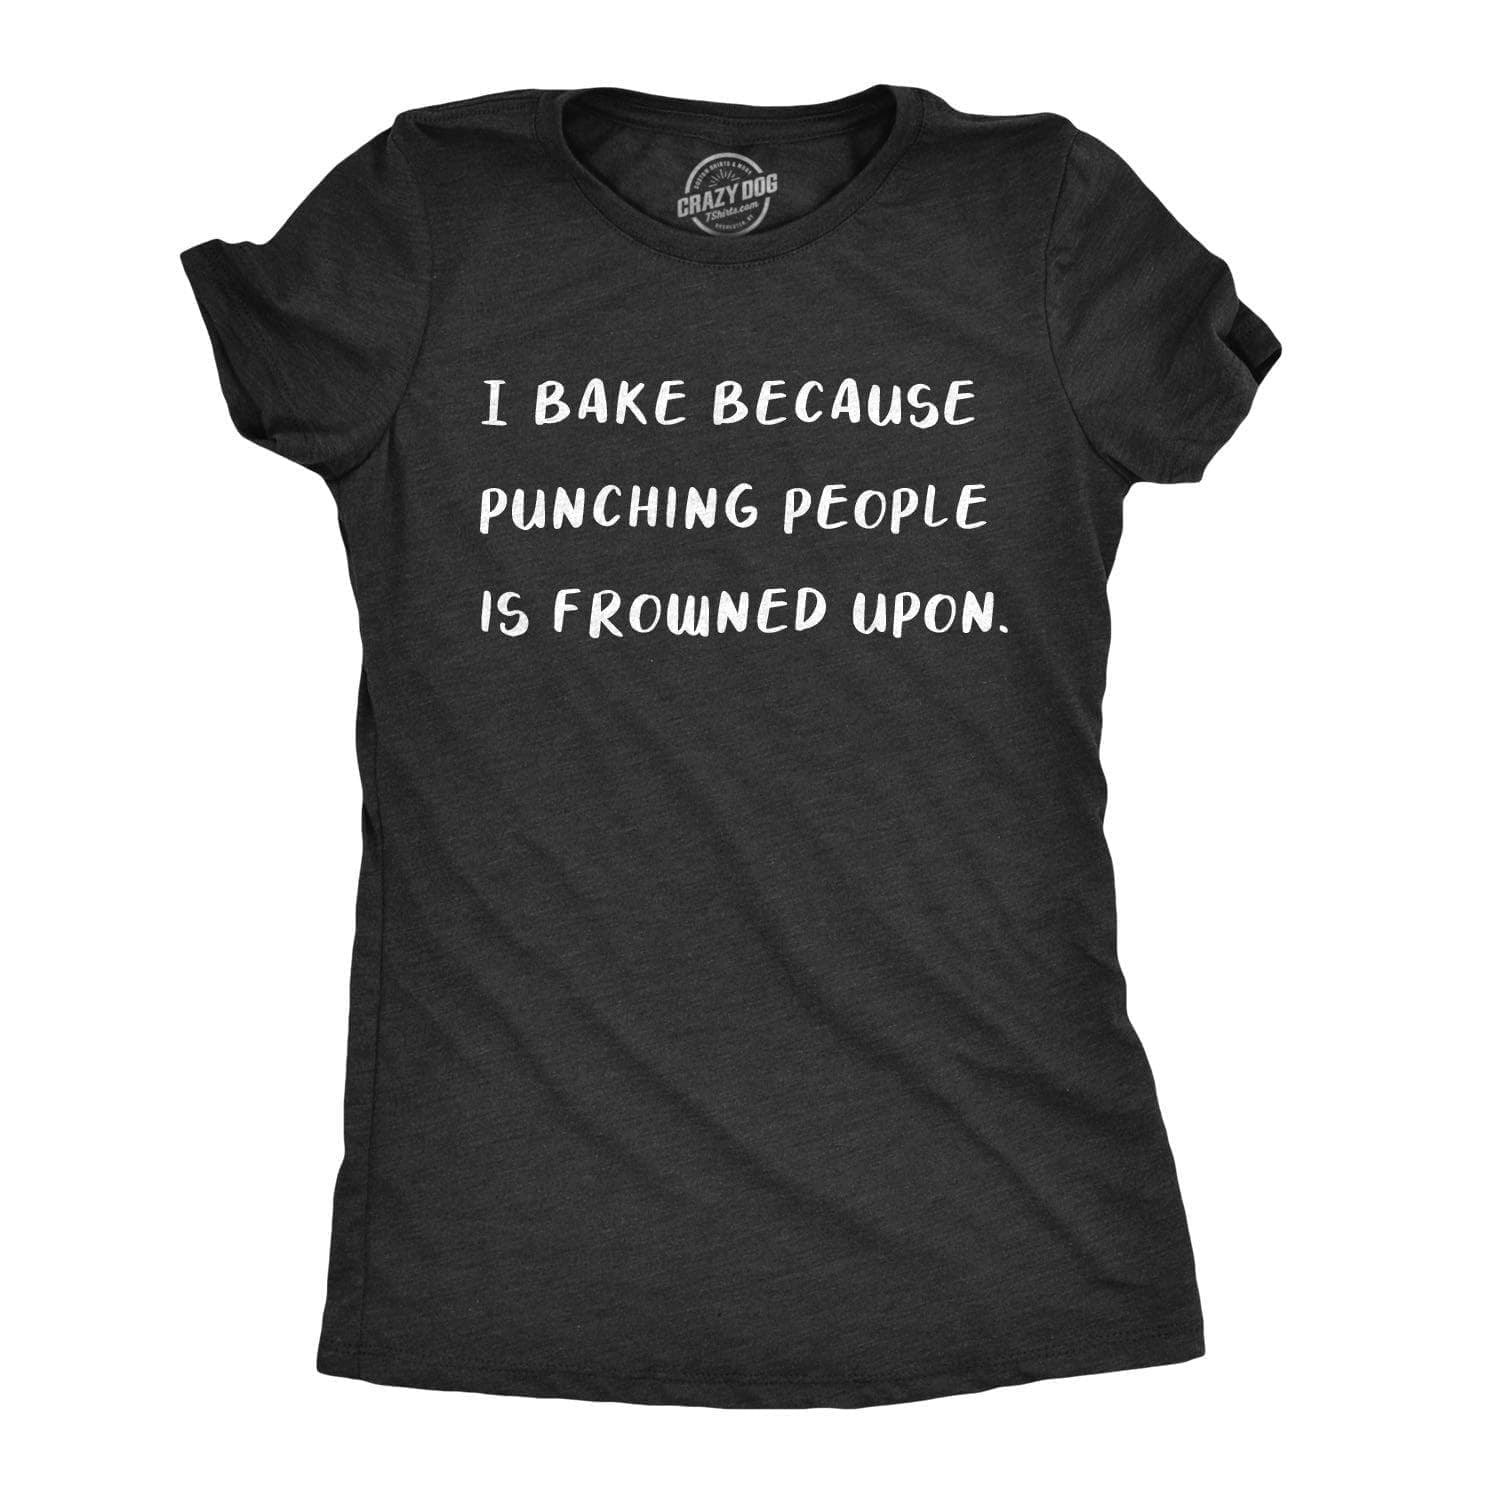 I Bake Because Punching People Is Frowned Upon Women's Tshirt - Crazy Dog T-Shirts